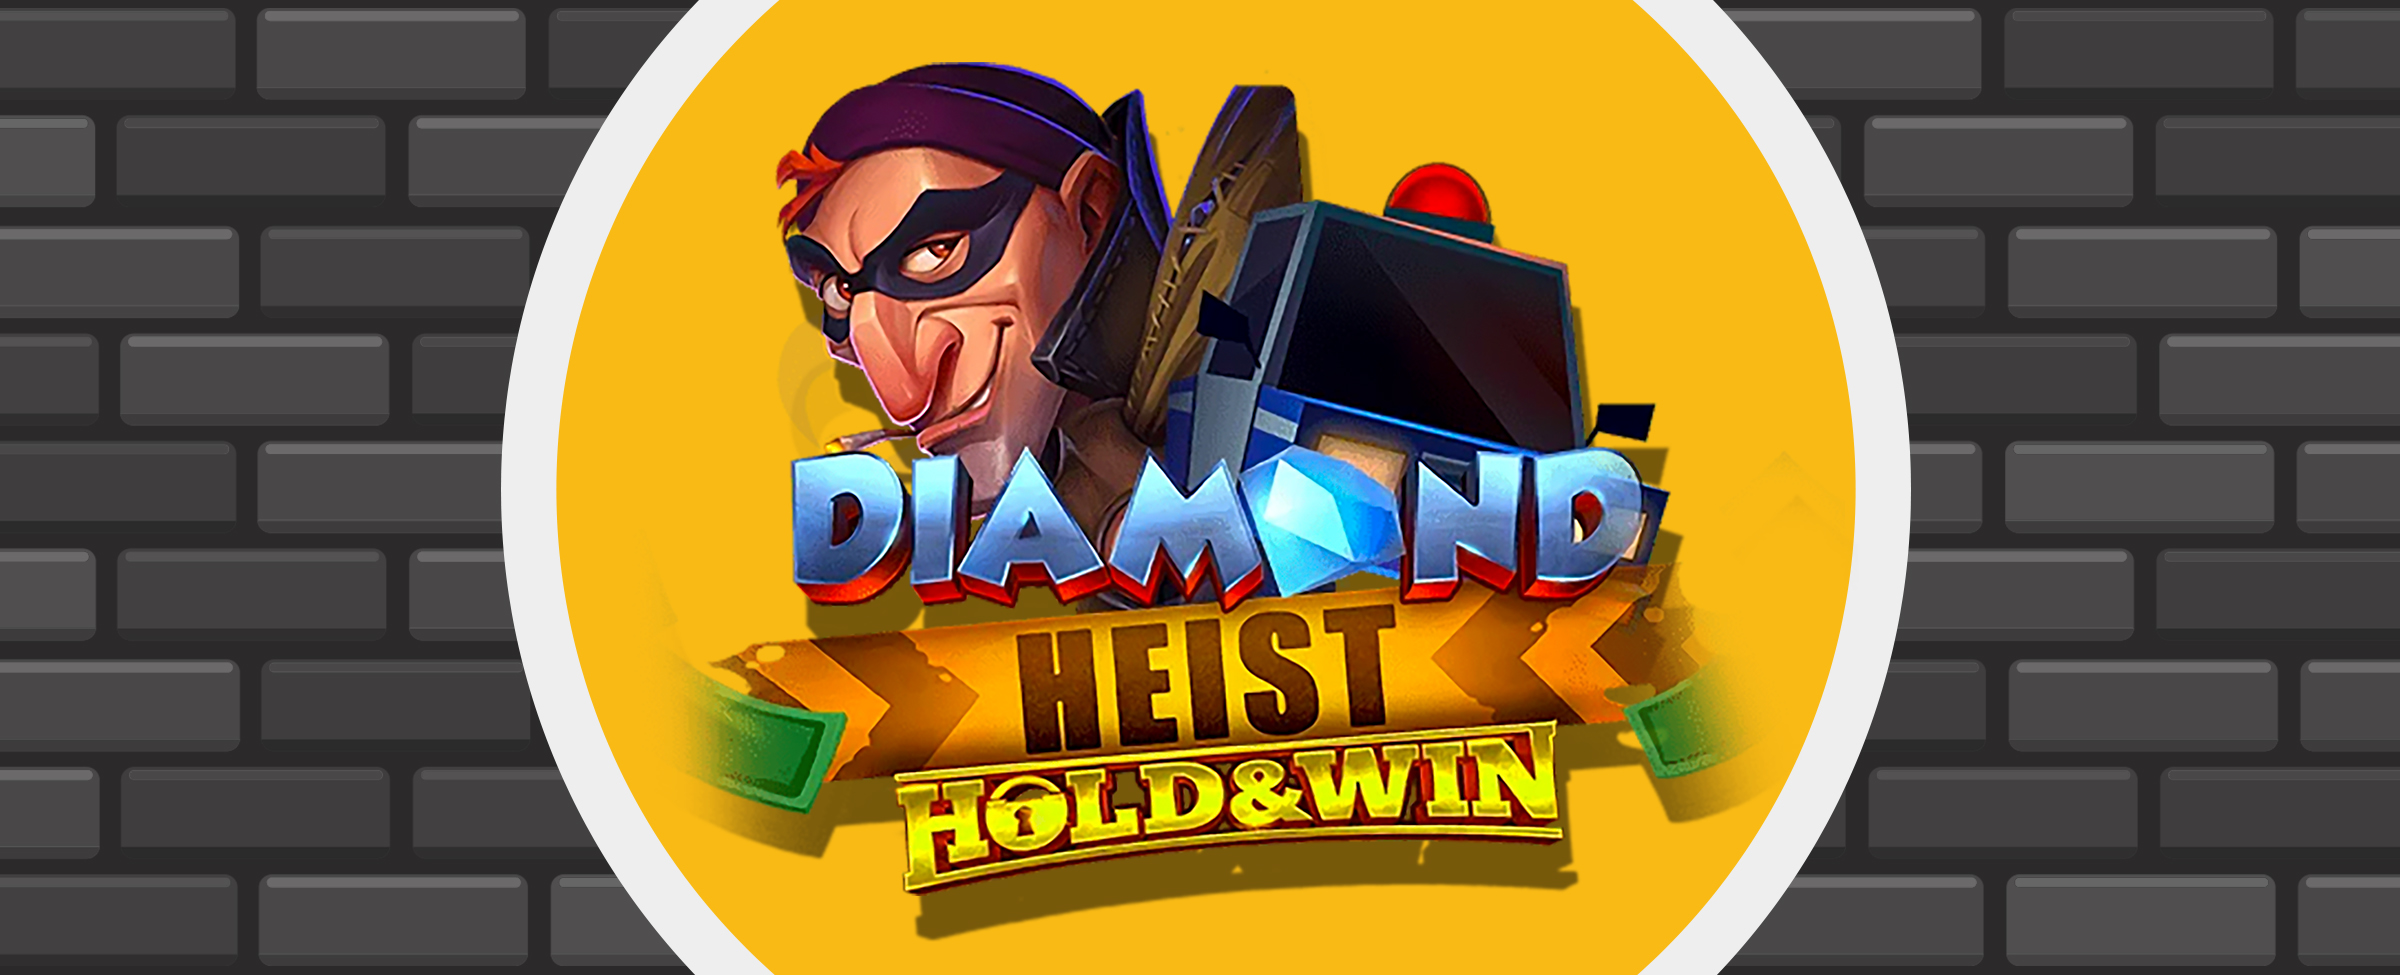 If heist movies are your bag, you’ll find Diamond Heist: Hold and Win irresistible. Get your rucksack ready and let’s go.